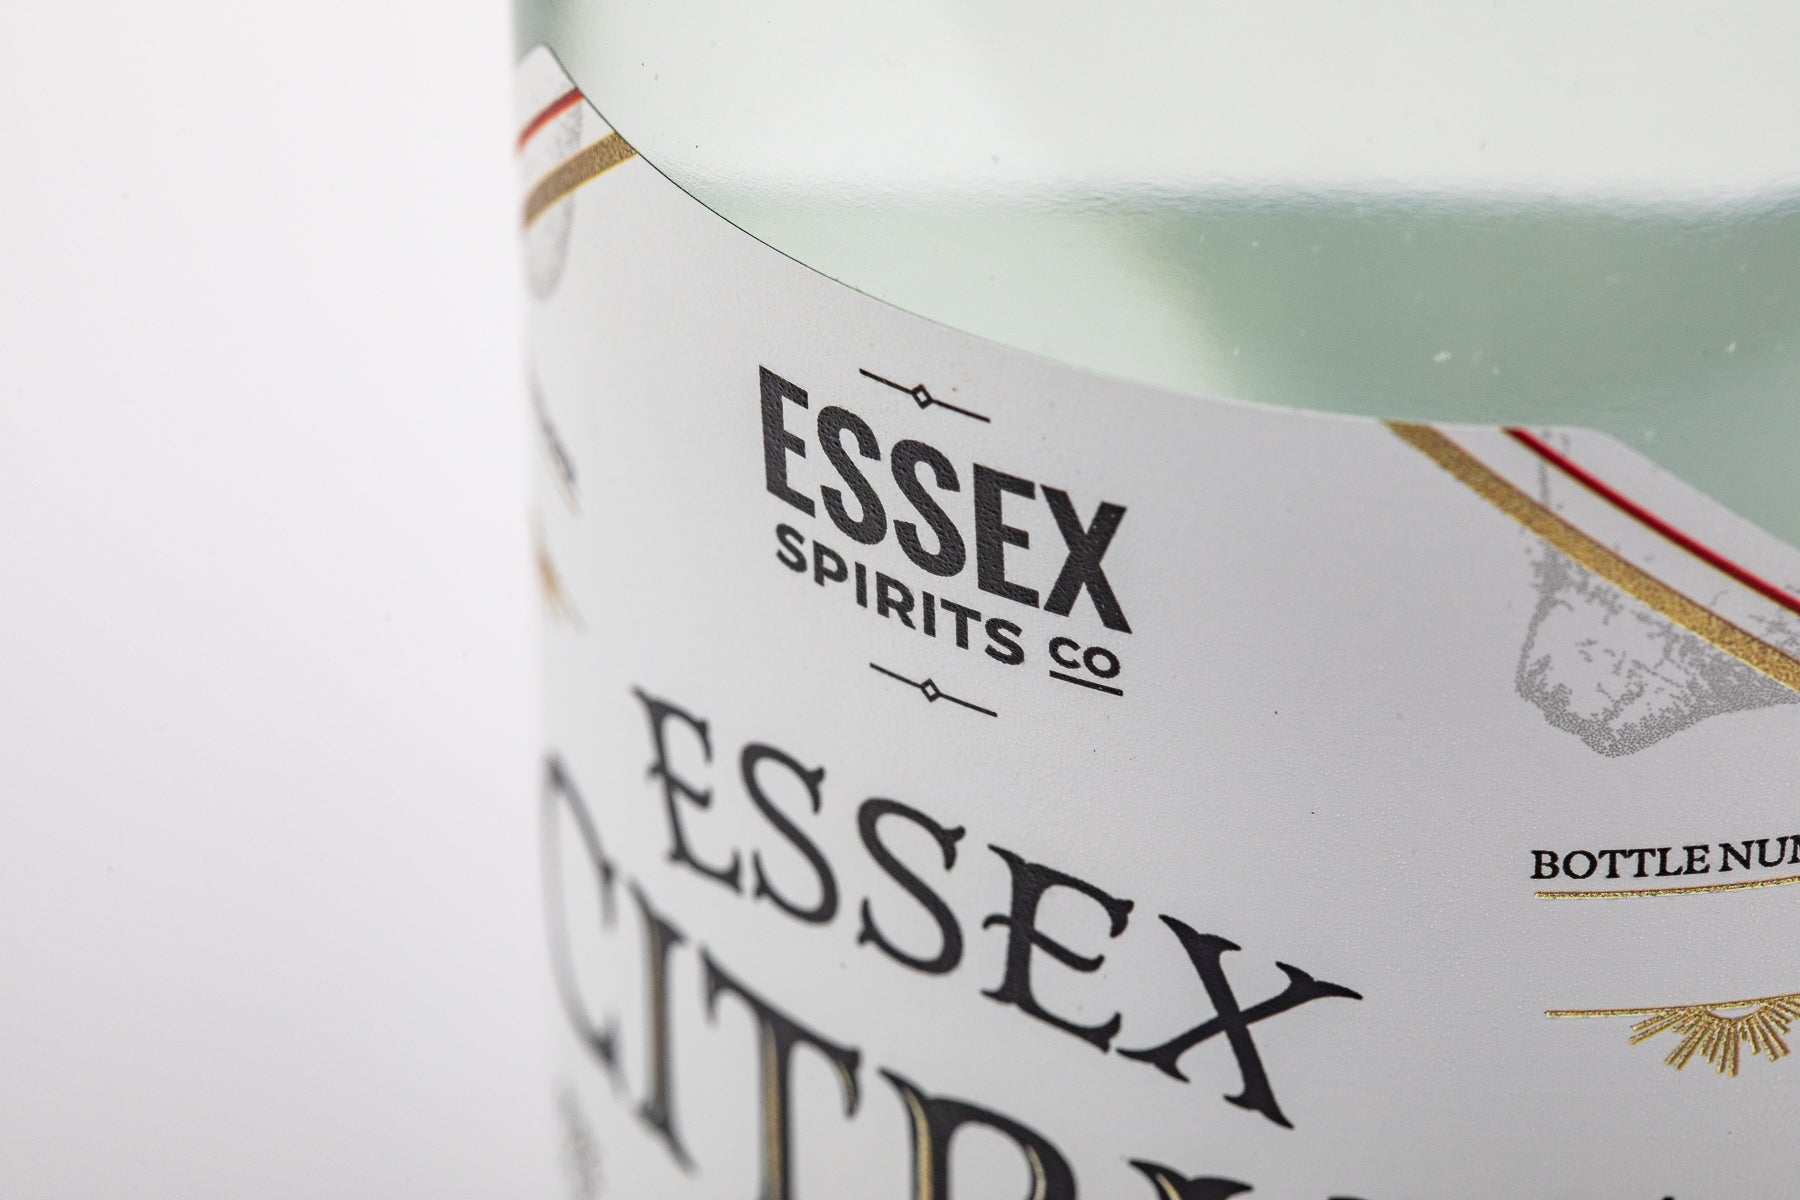 Logo on the bottle of Essex Citrus Dry Gin available at Essex Spirits Company distillery and bottle shop. Buy online